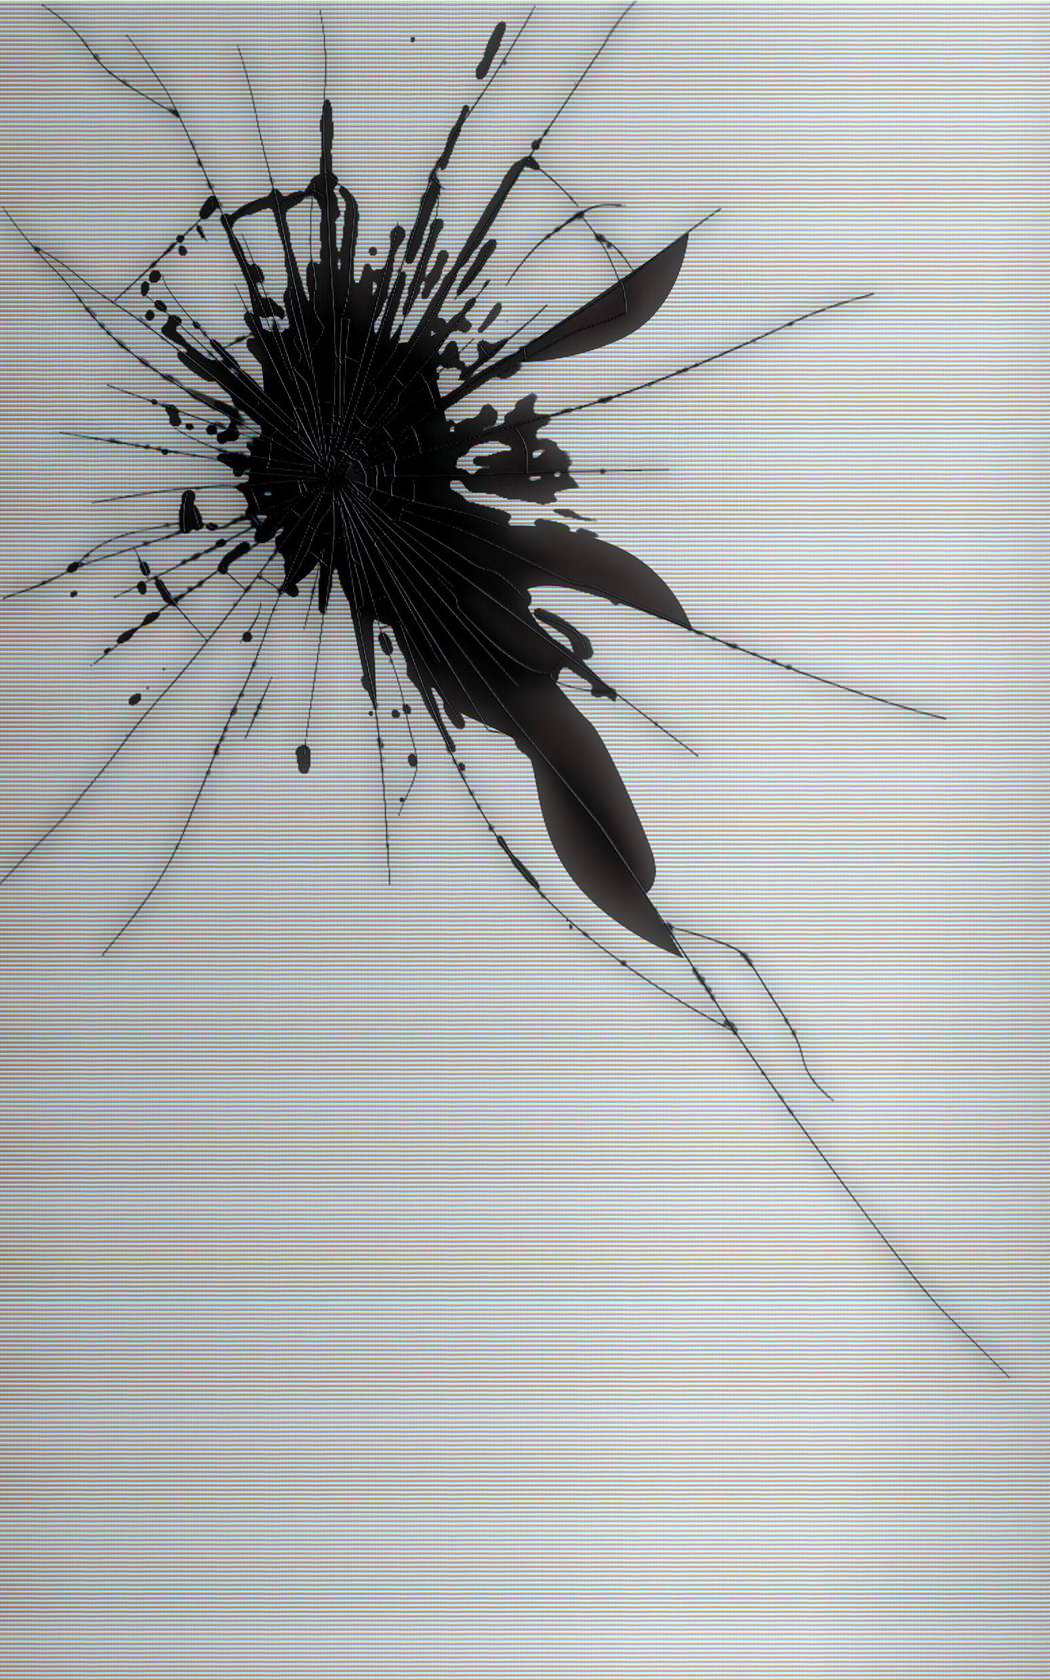 Broken and Shattered iPad and iPhone Screen Wallpaper